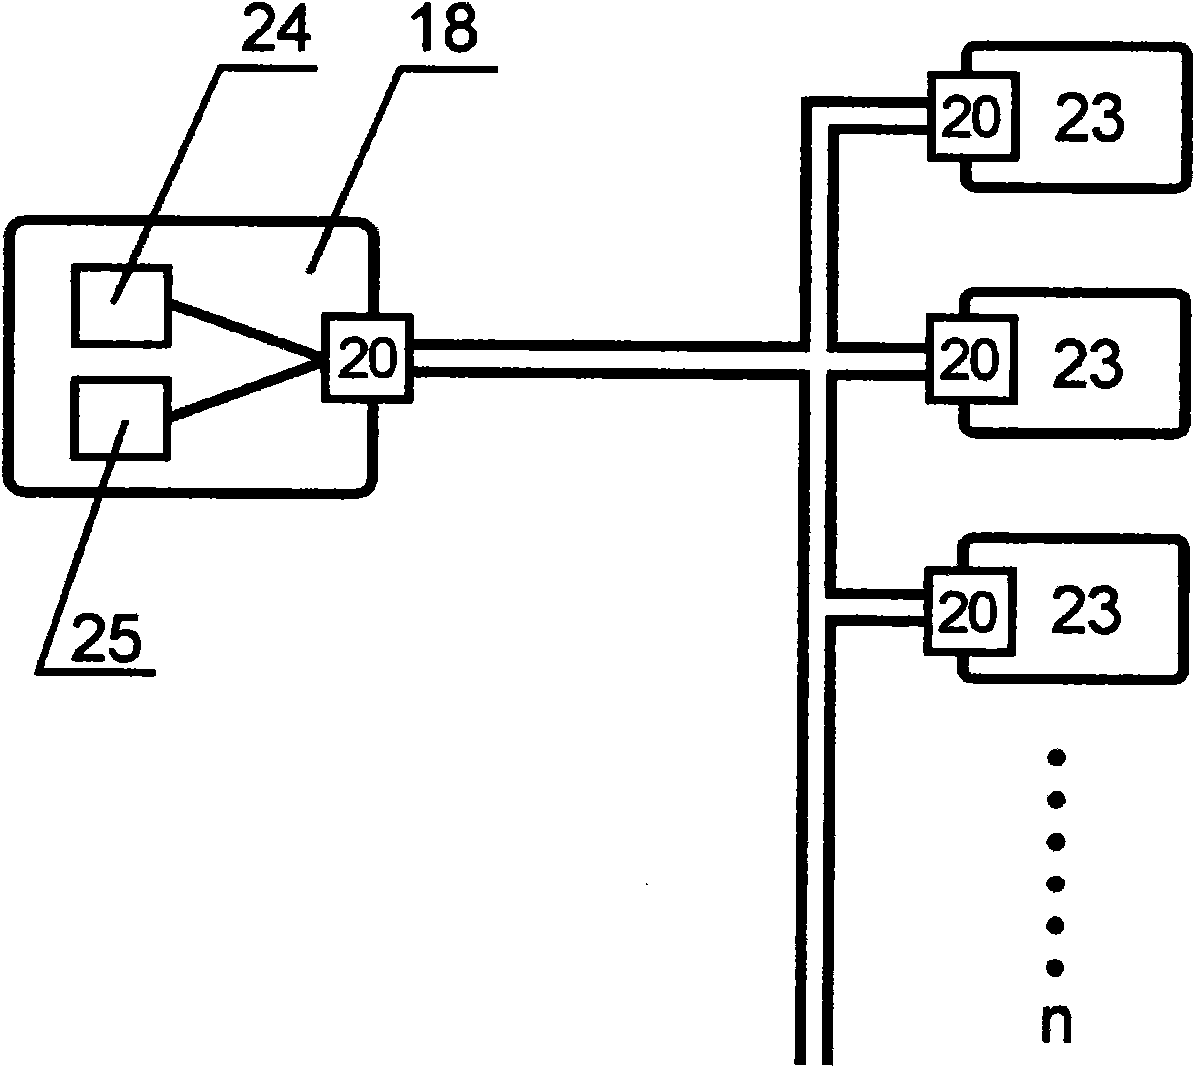 Automotive electric controlled automotive air conditioner system teaching experimental device